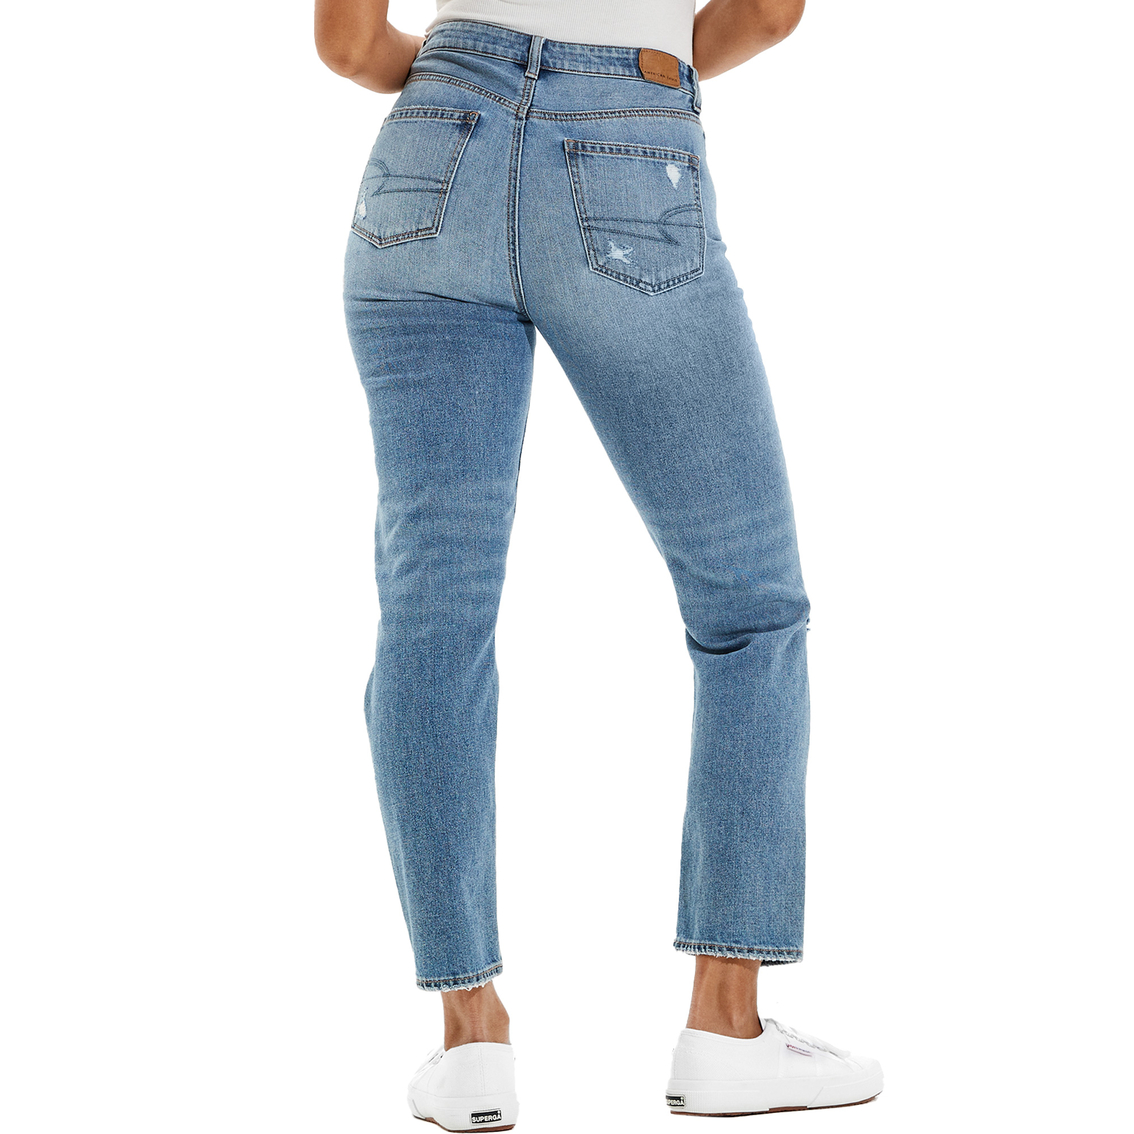 American Eagle Ripped Mom Jeans - Image 2 of 8